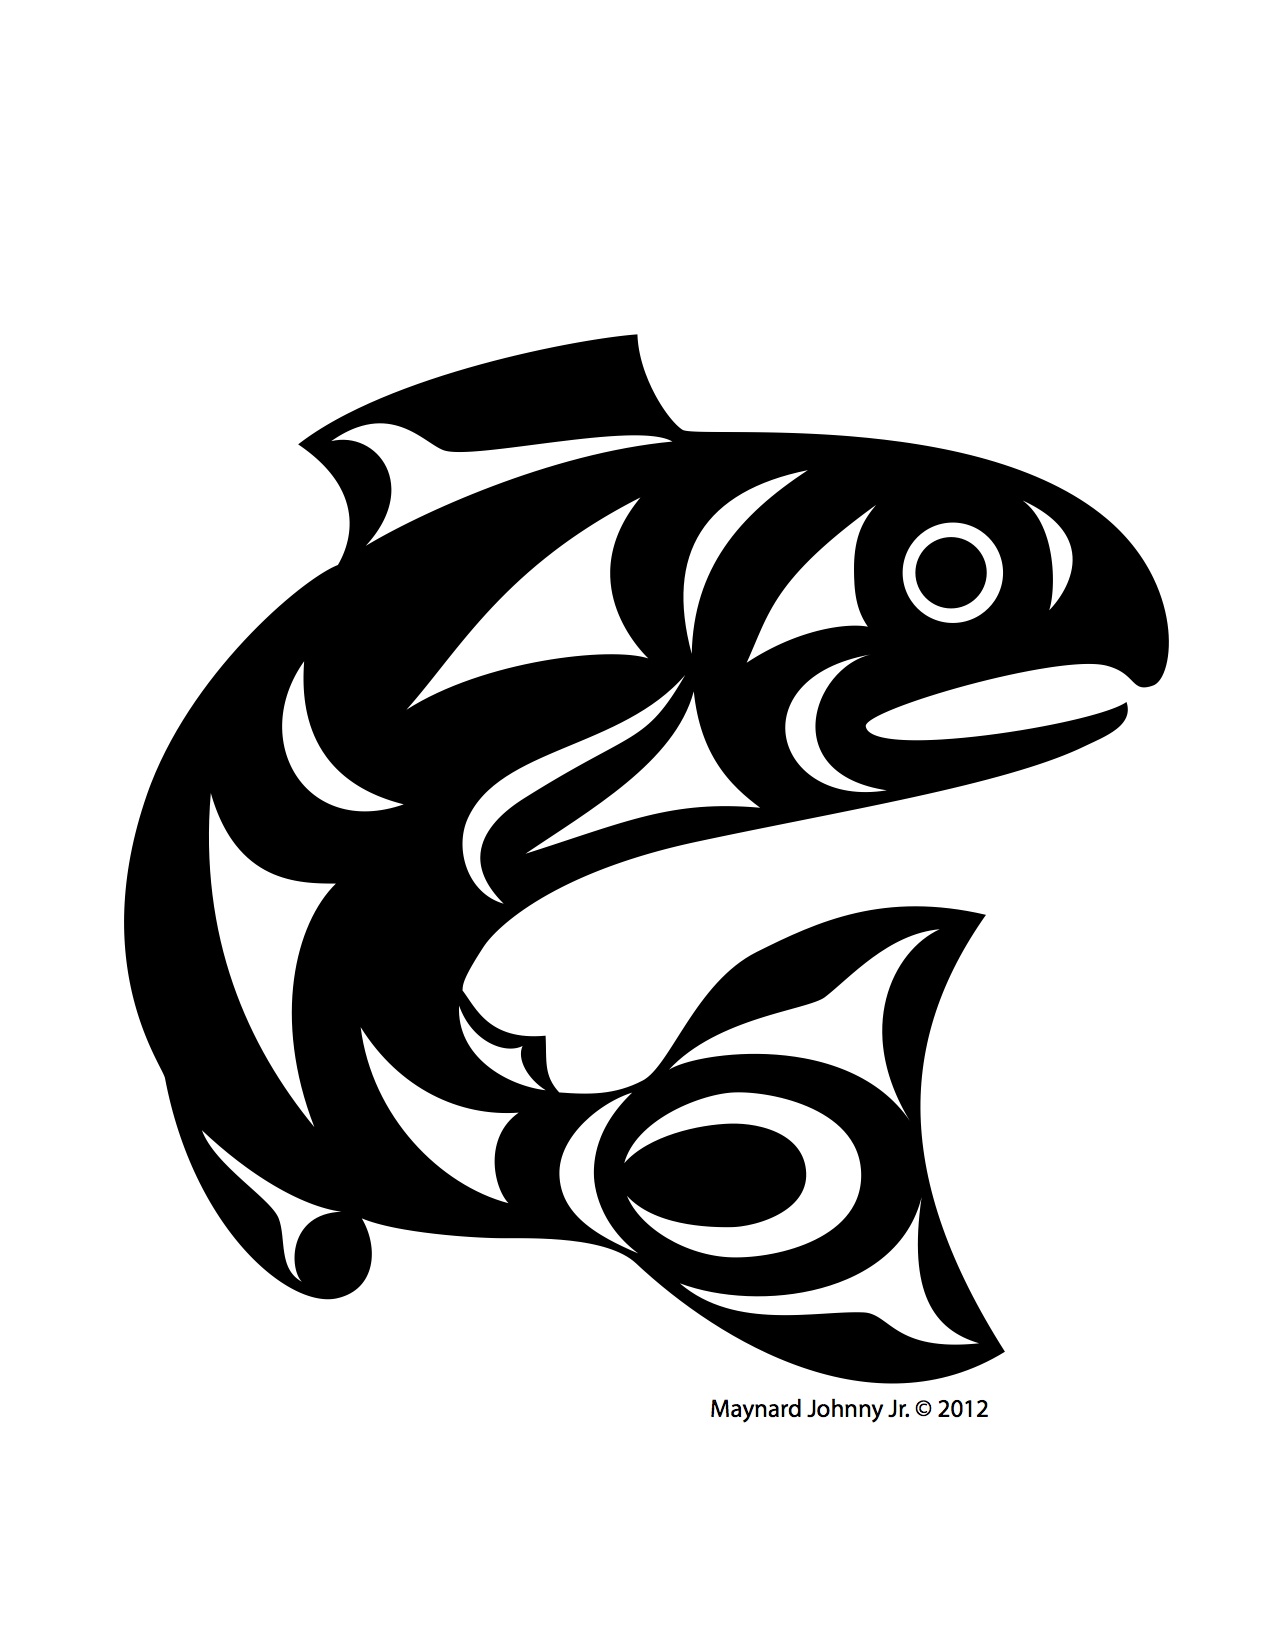 chinook salmon black and white illustration free download